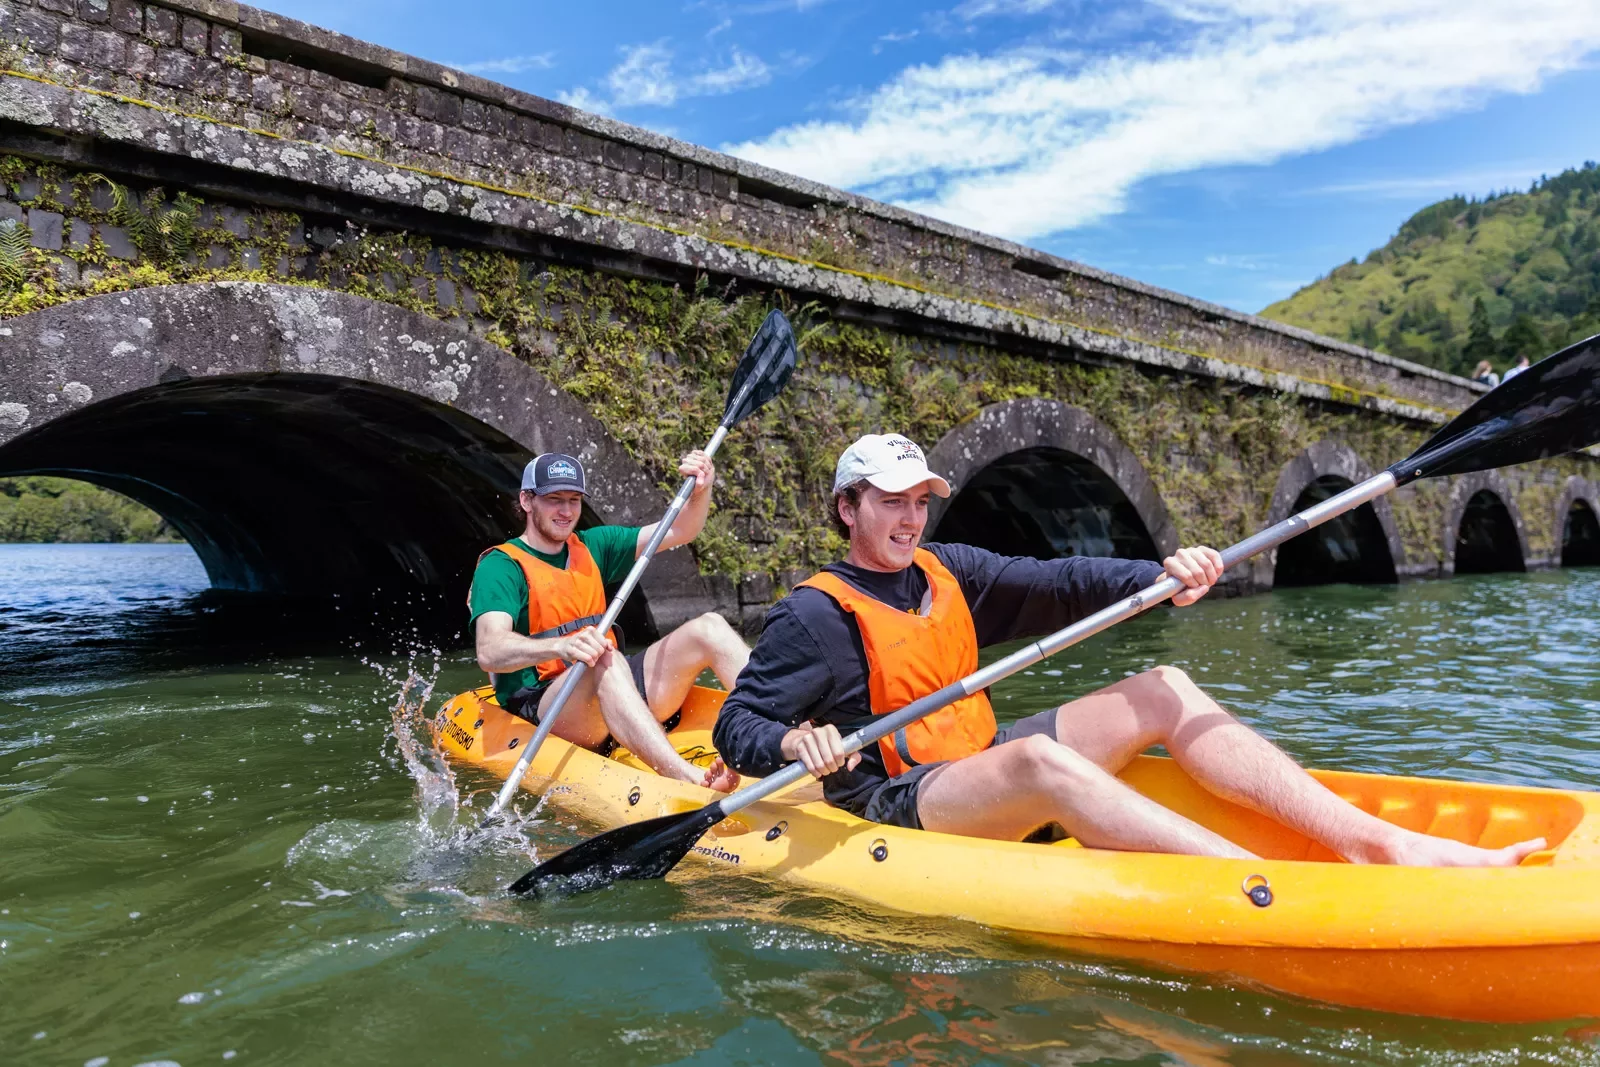 Two men on a kayak, paddling in a river by a bridge